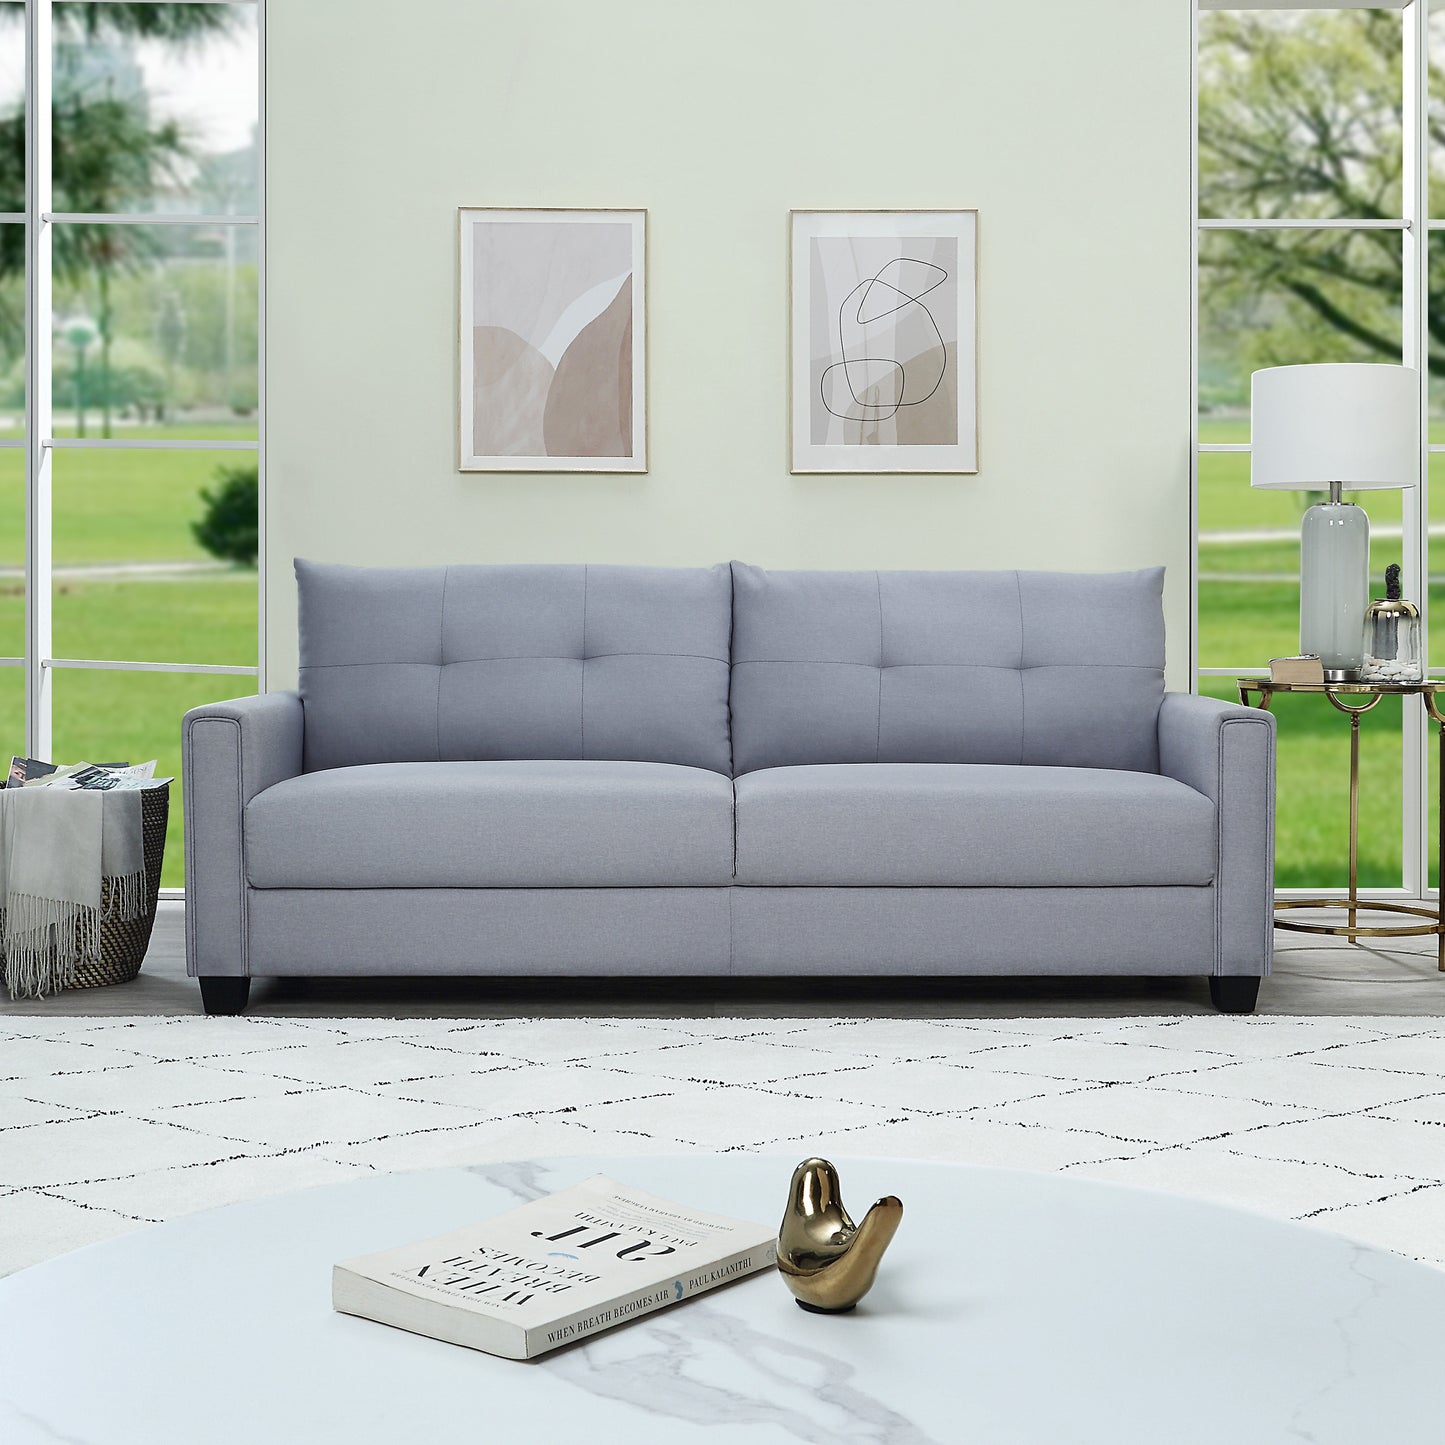 Linen Fabric Upholstery sofa/Tufted Cushions/ Easy, Assembly,Light Grey